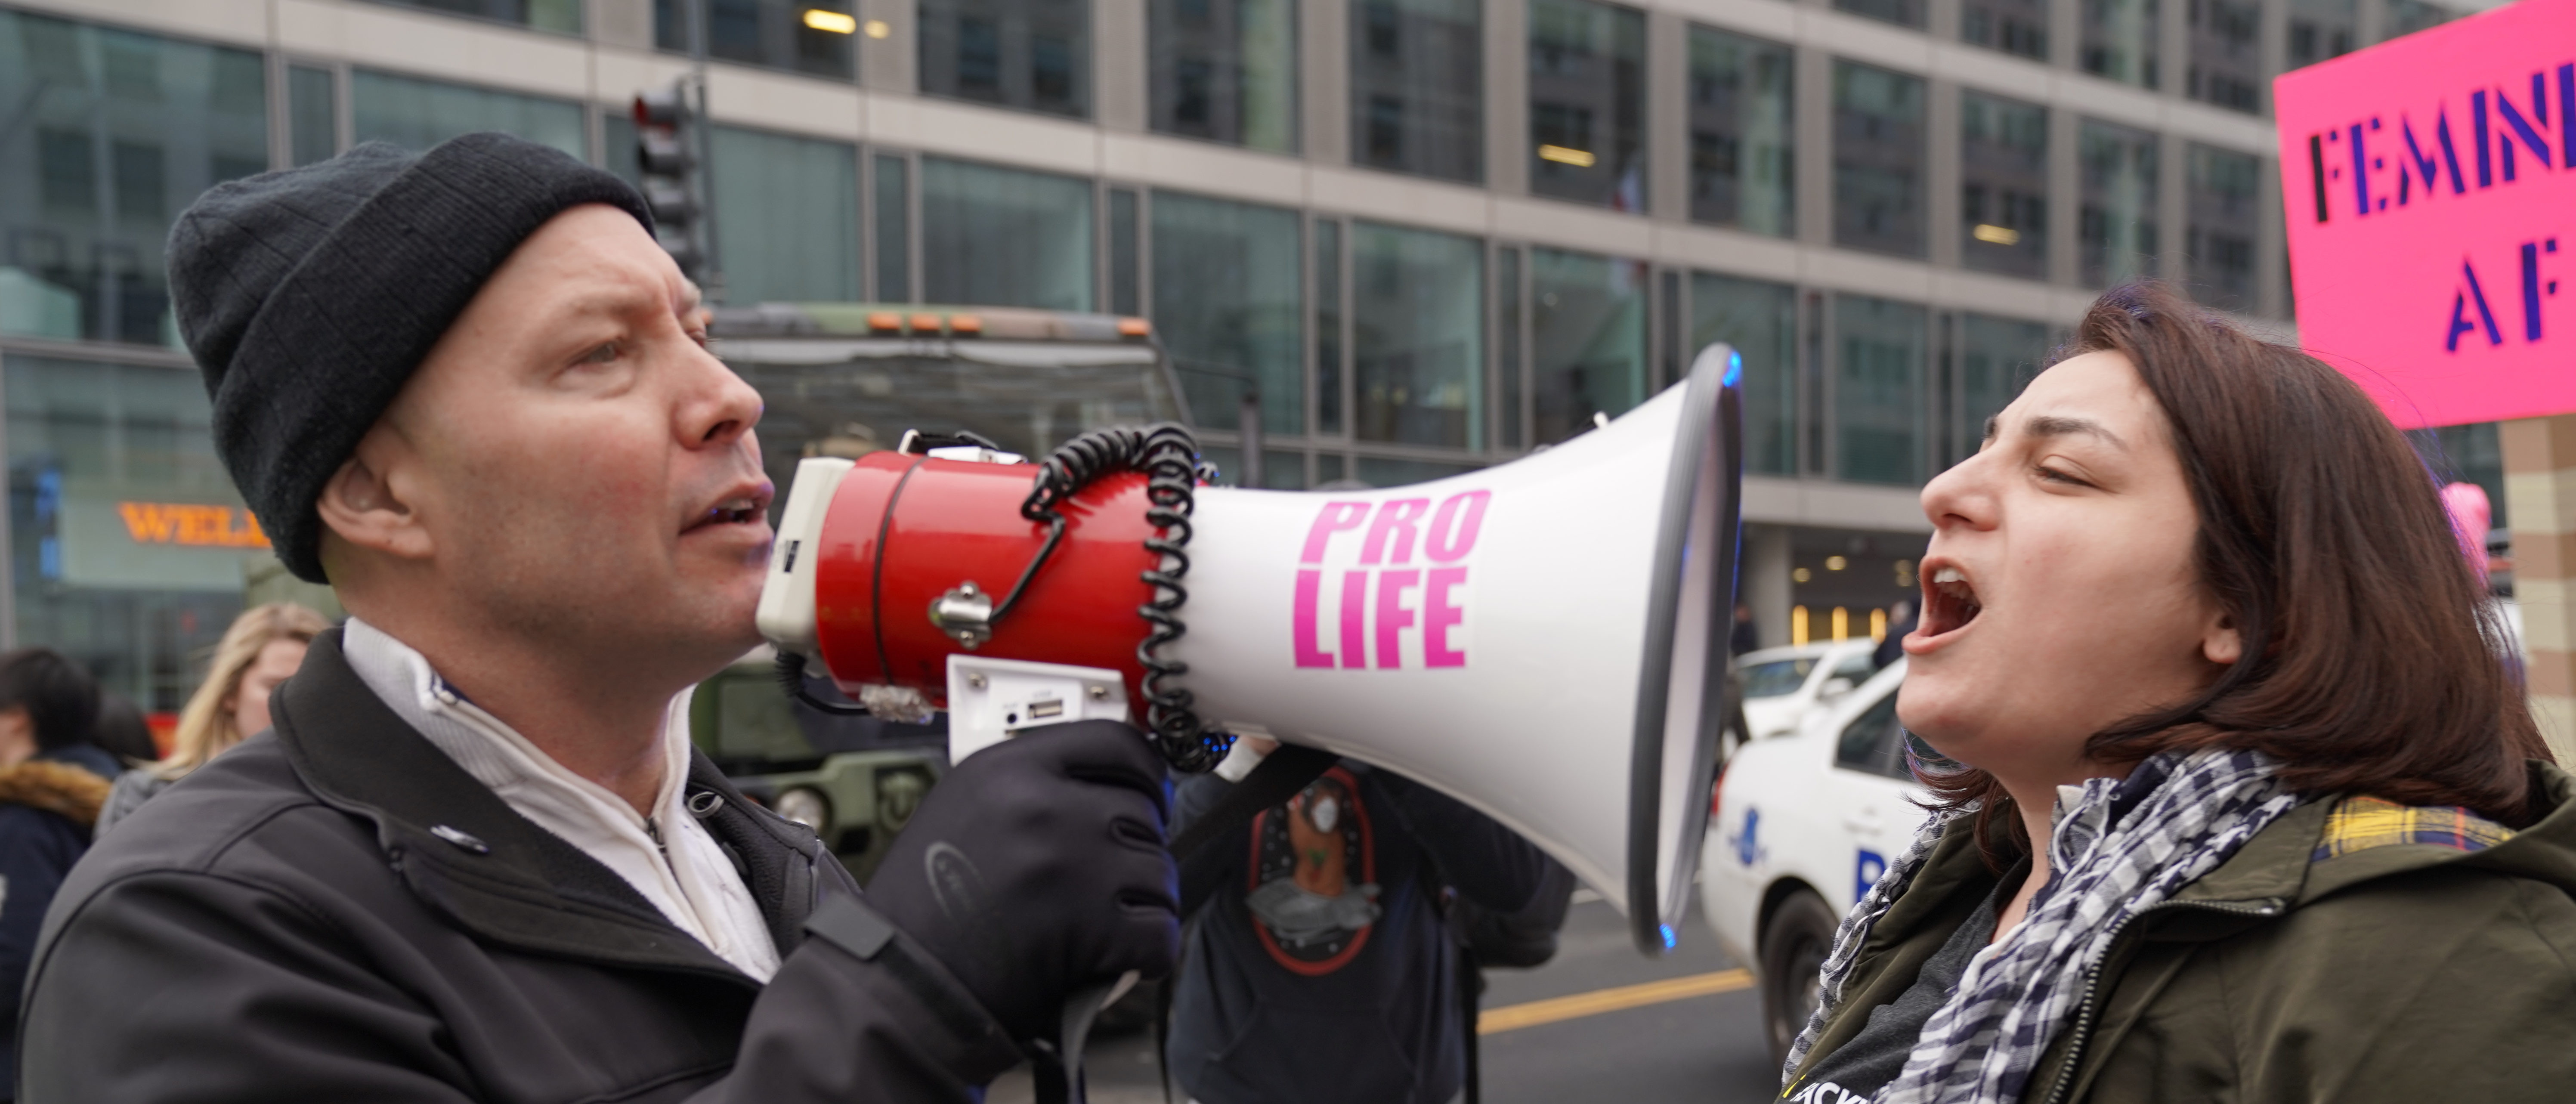 January 19, 2019: An abortion supporter shouts into a bull horn of an anti-abortion activist under police protection at the 2019 Women’s March. Shutterstock/Phil Pasquini